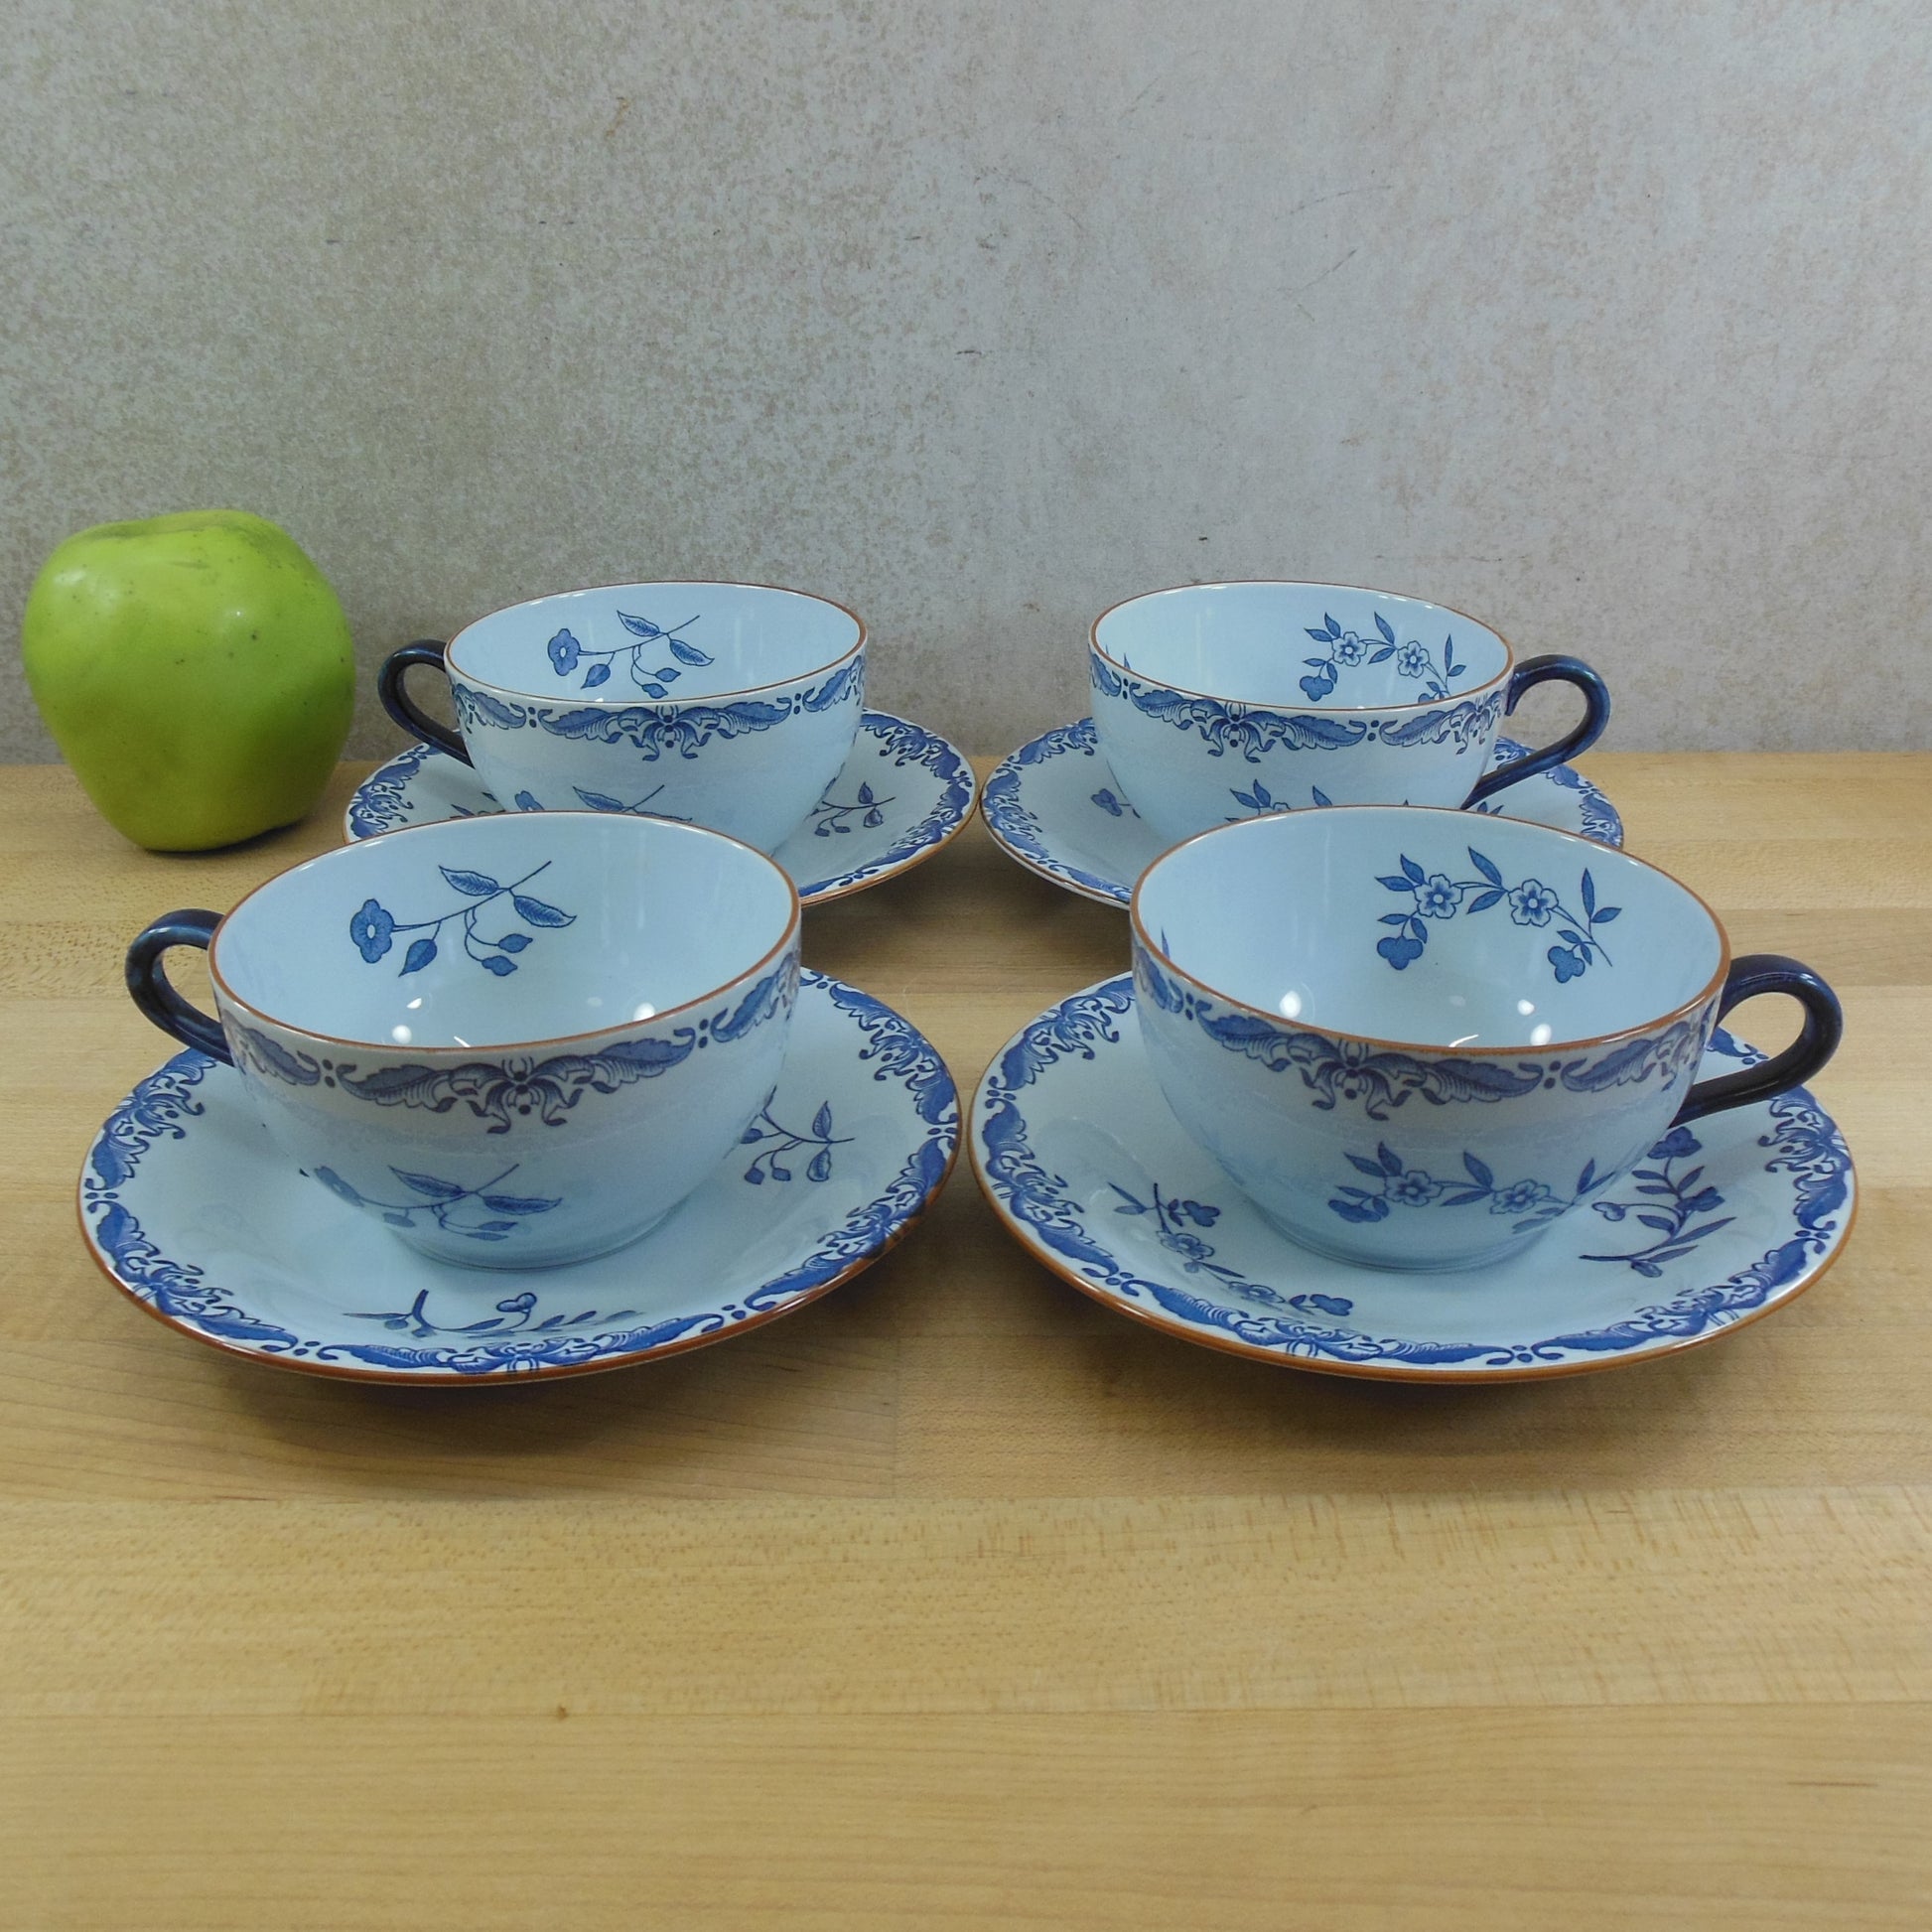 Rorstrand Sweden Ostindia East Indies Dinnerware - Cups & Saucers 4 Set